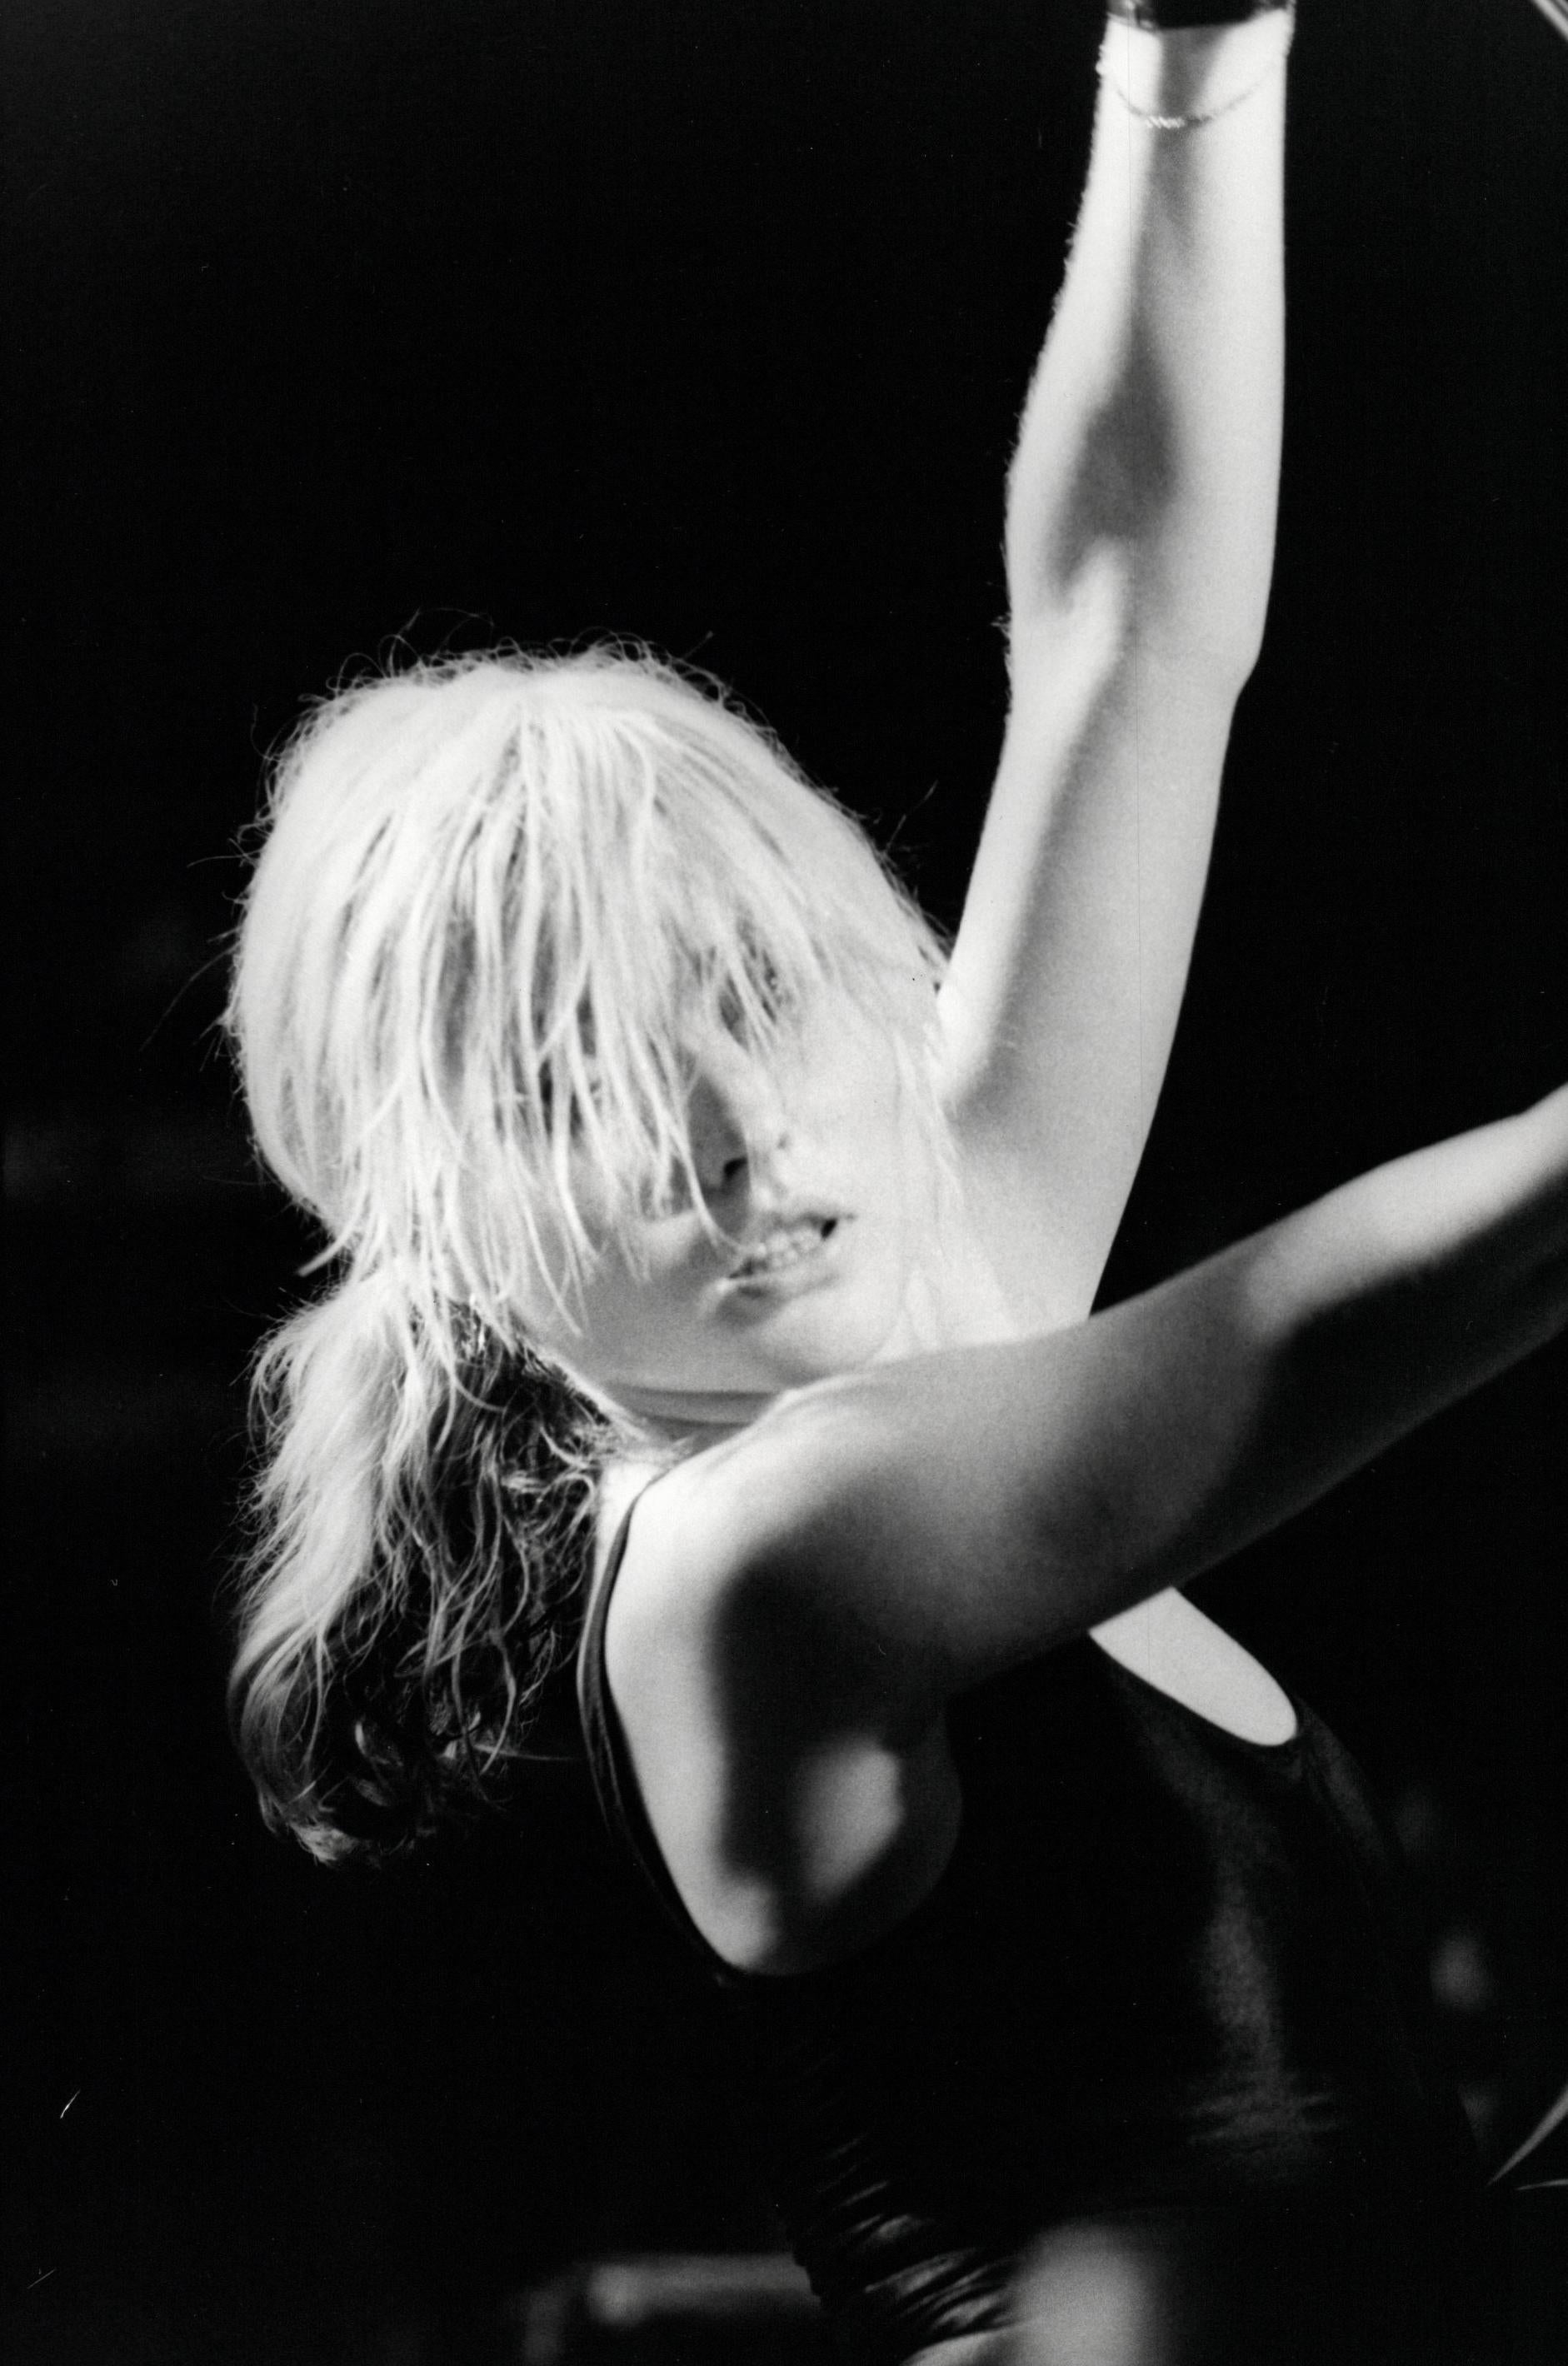 Paul Cox Black and White Photograph - Debbie Harry of Blondie Rocking Out on Stage Vintage Original Photograph